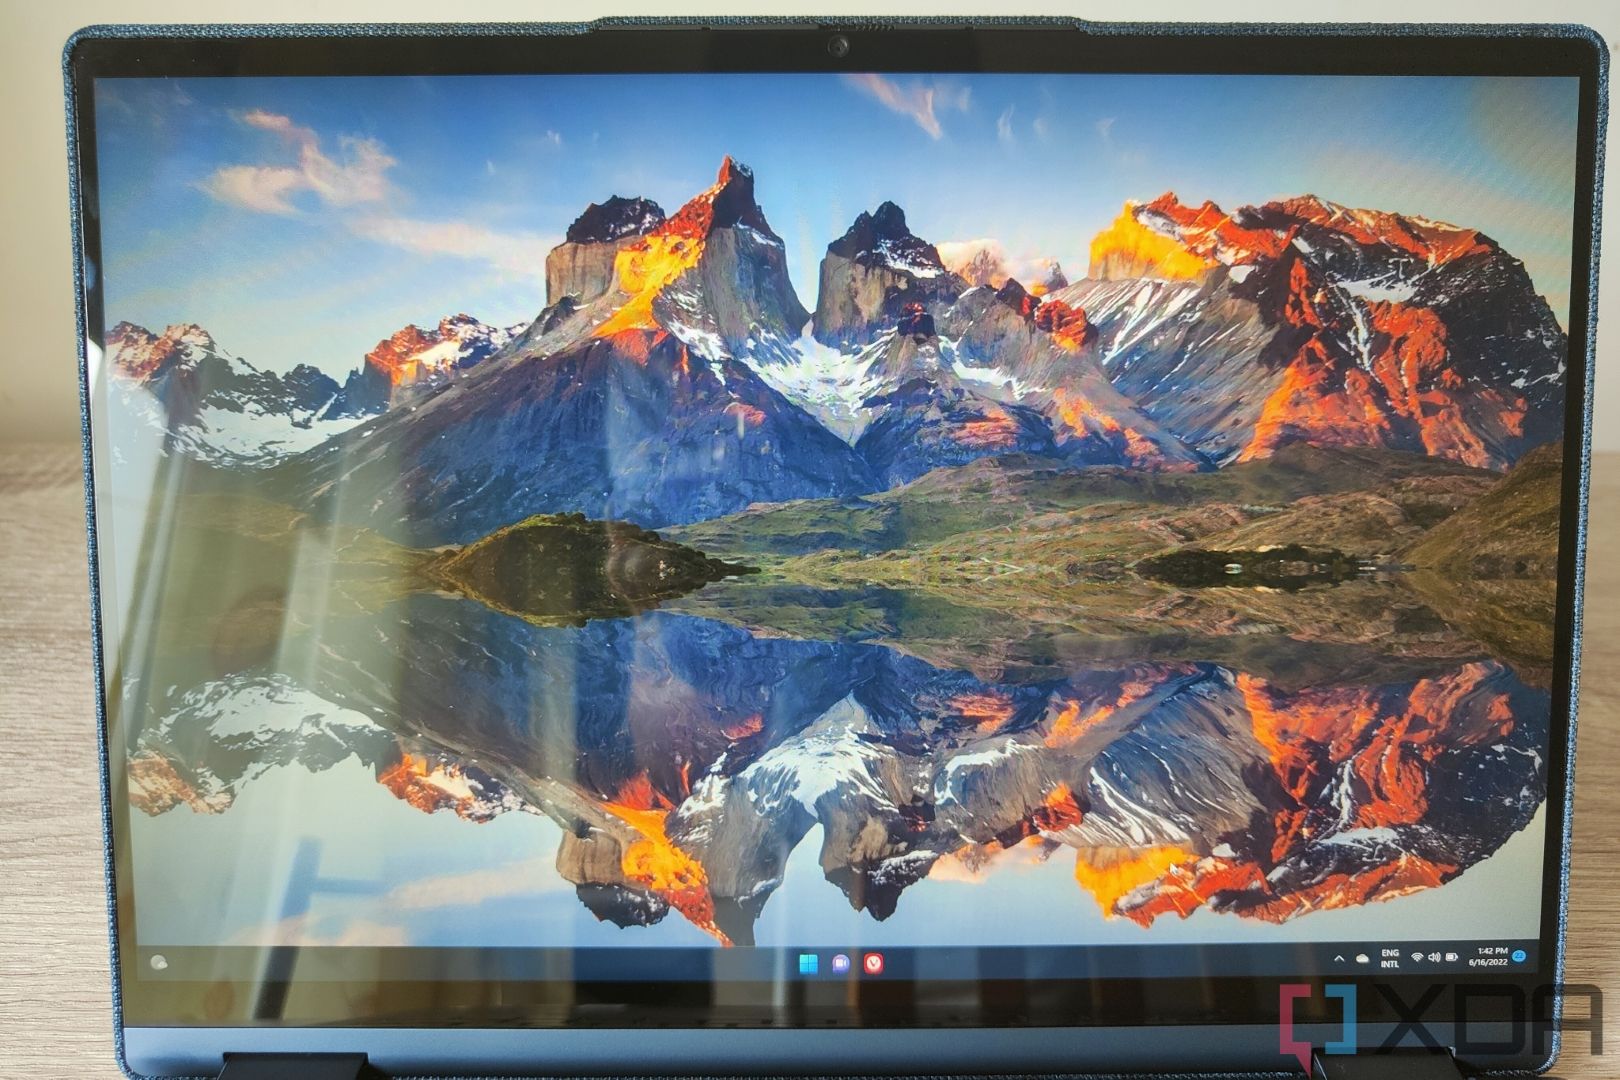 Close-up view of the Lenovo Yoga 6's display showing the Windows 11 desktop